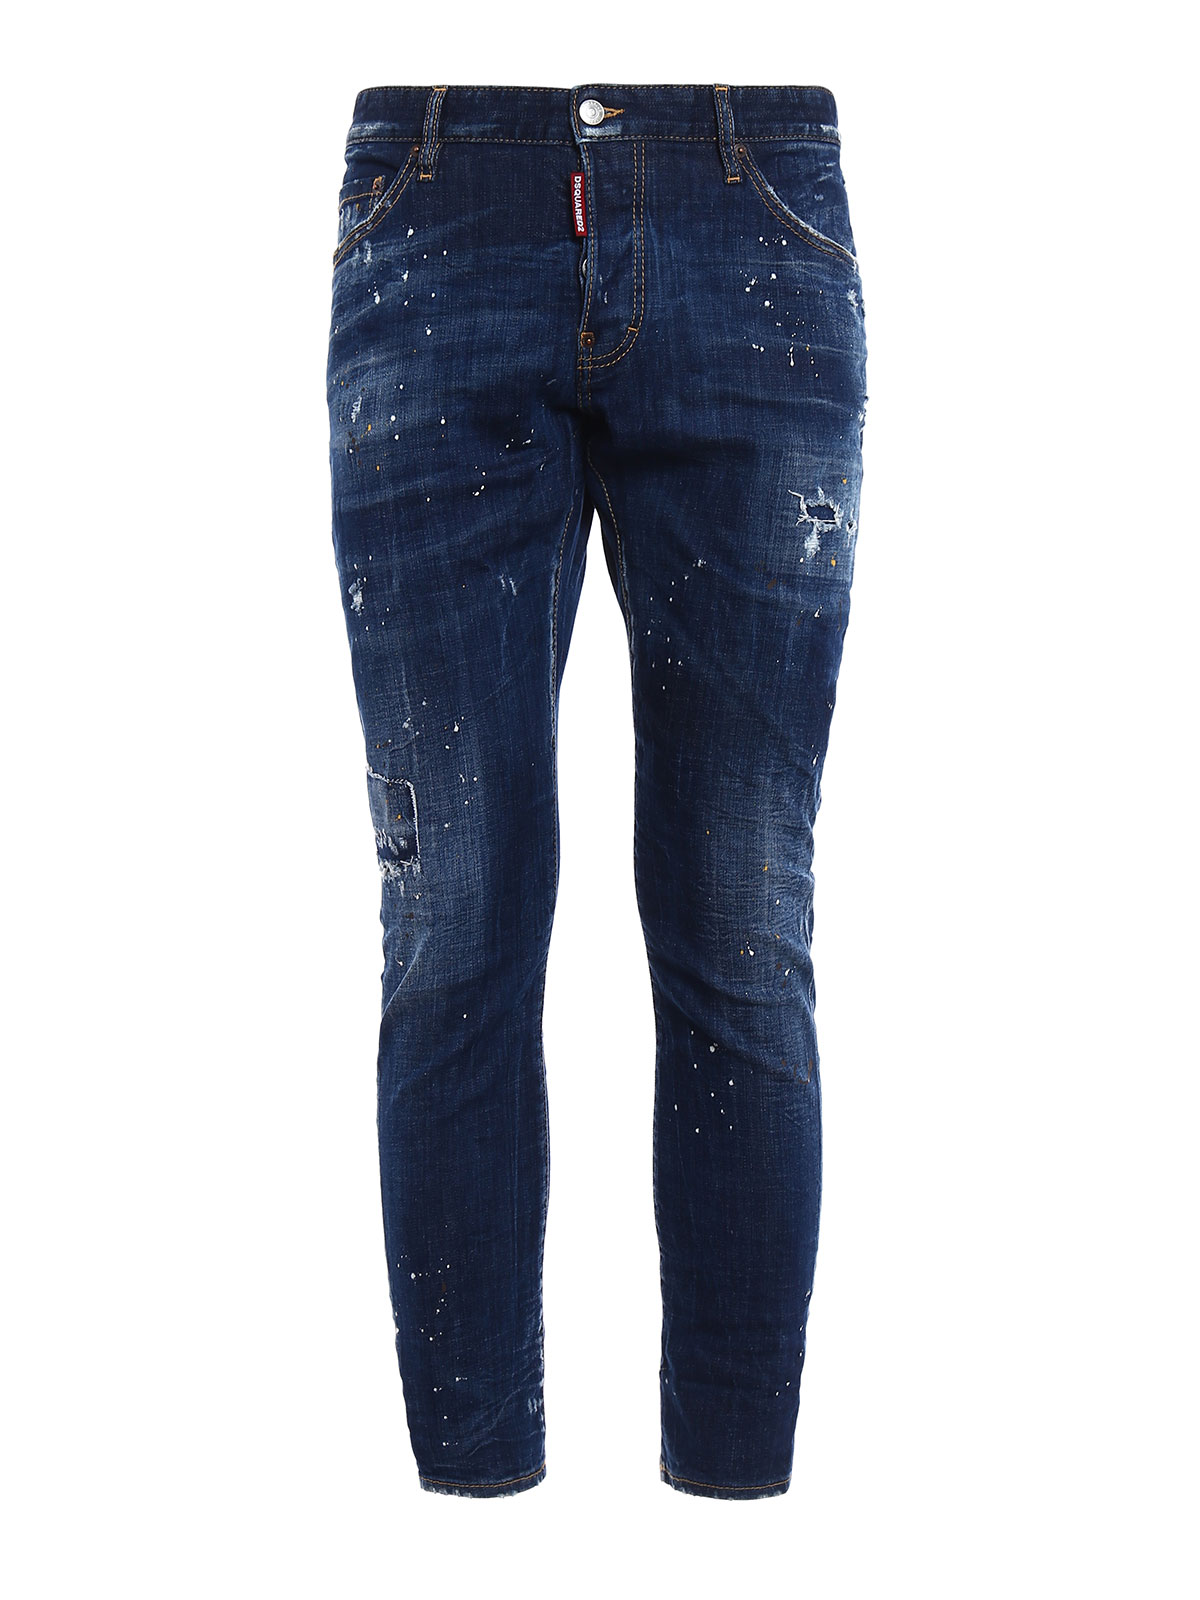 Skinny jeans Dsquared2 - Sexy Twist tropical hanky jeans 